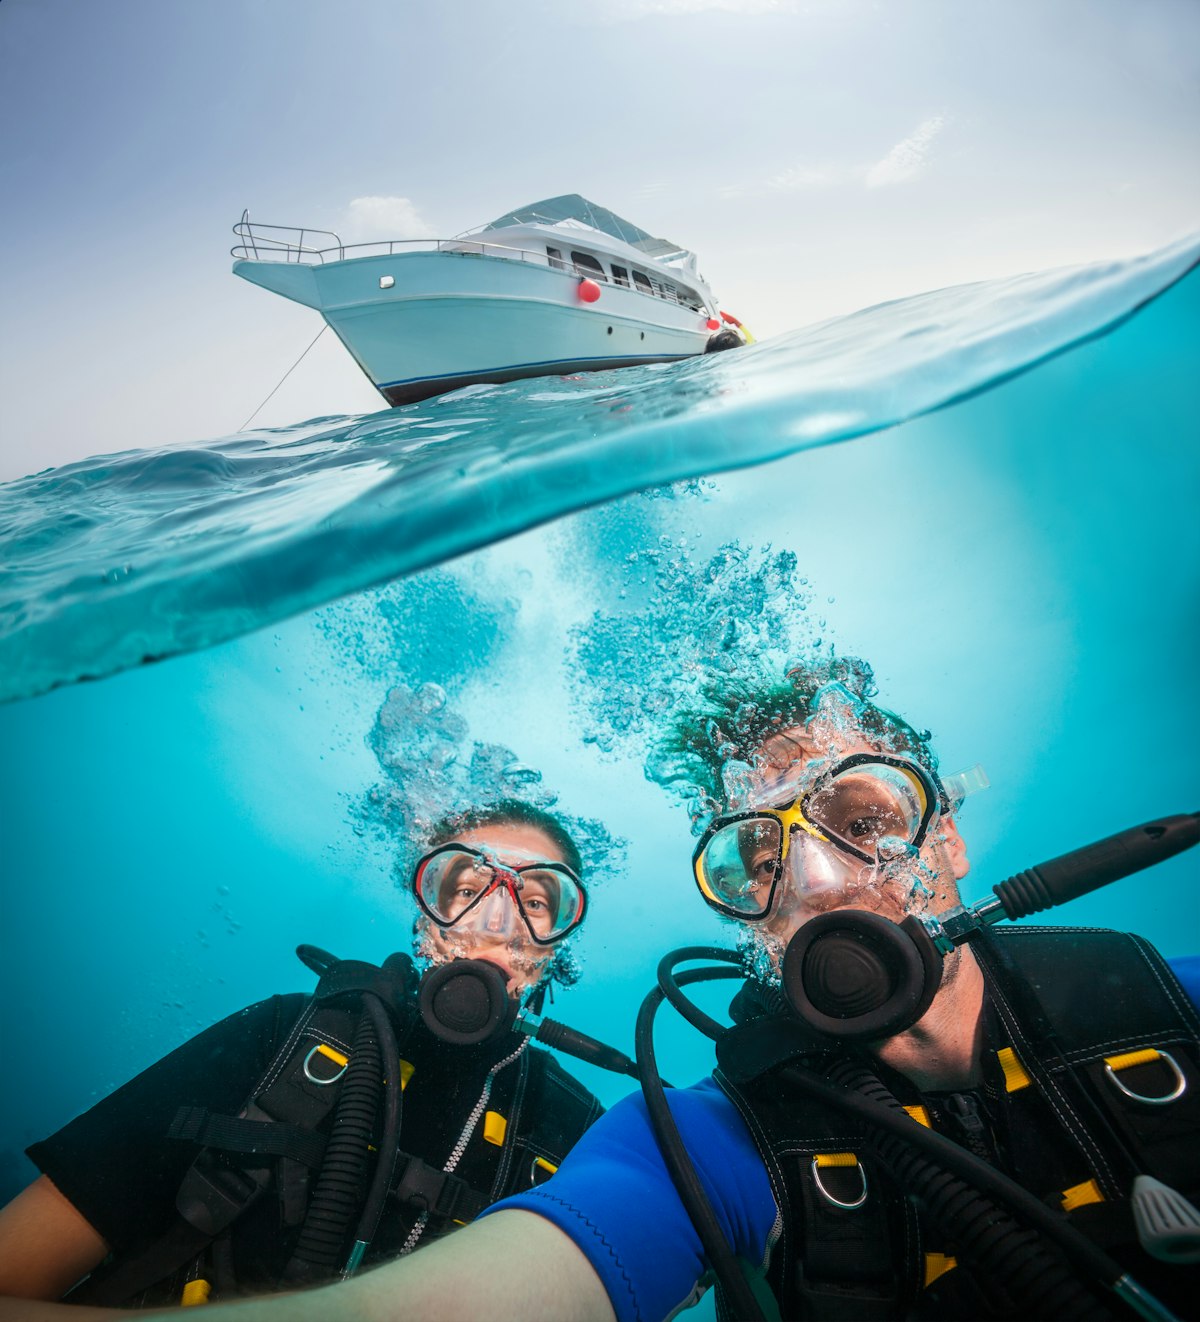 Combine the thrills of sailing and scuba diving. Check out preparation tips, finding the right instructor, and essential items you shouldn't forget.